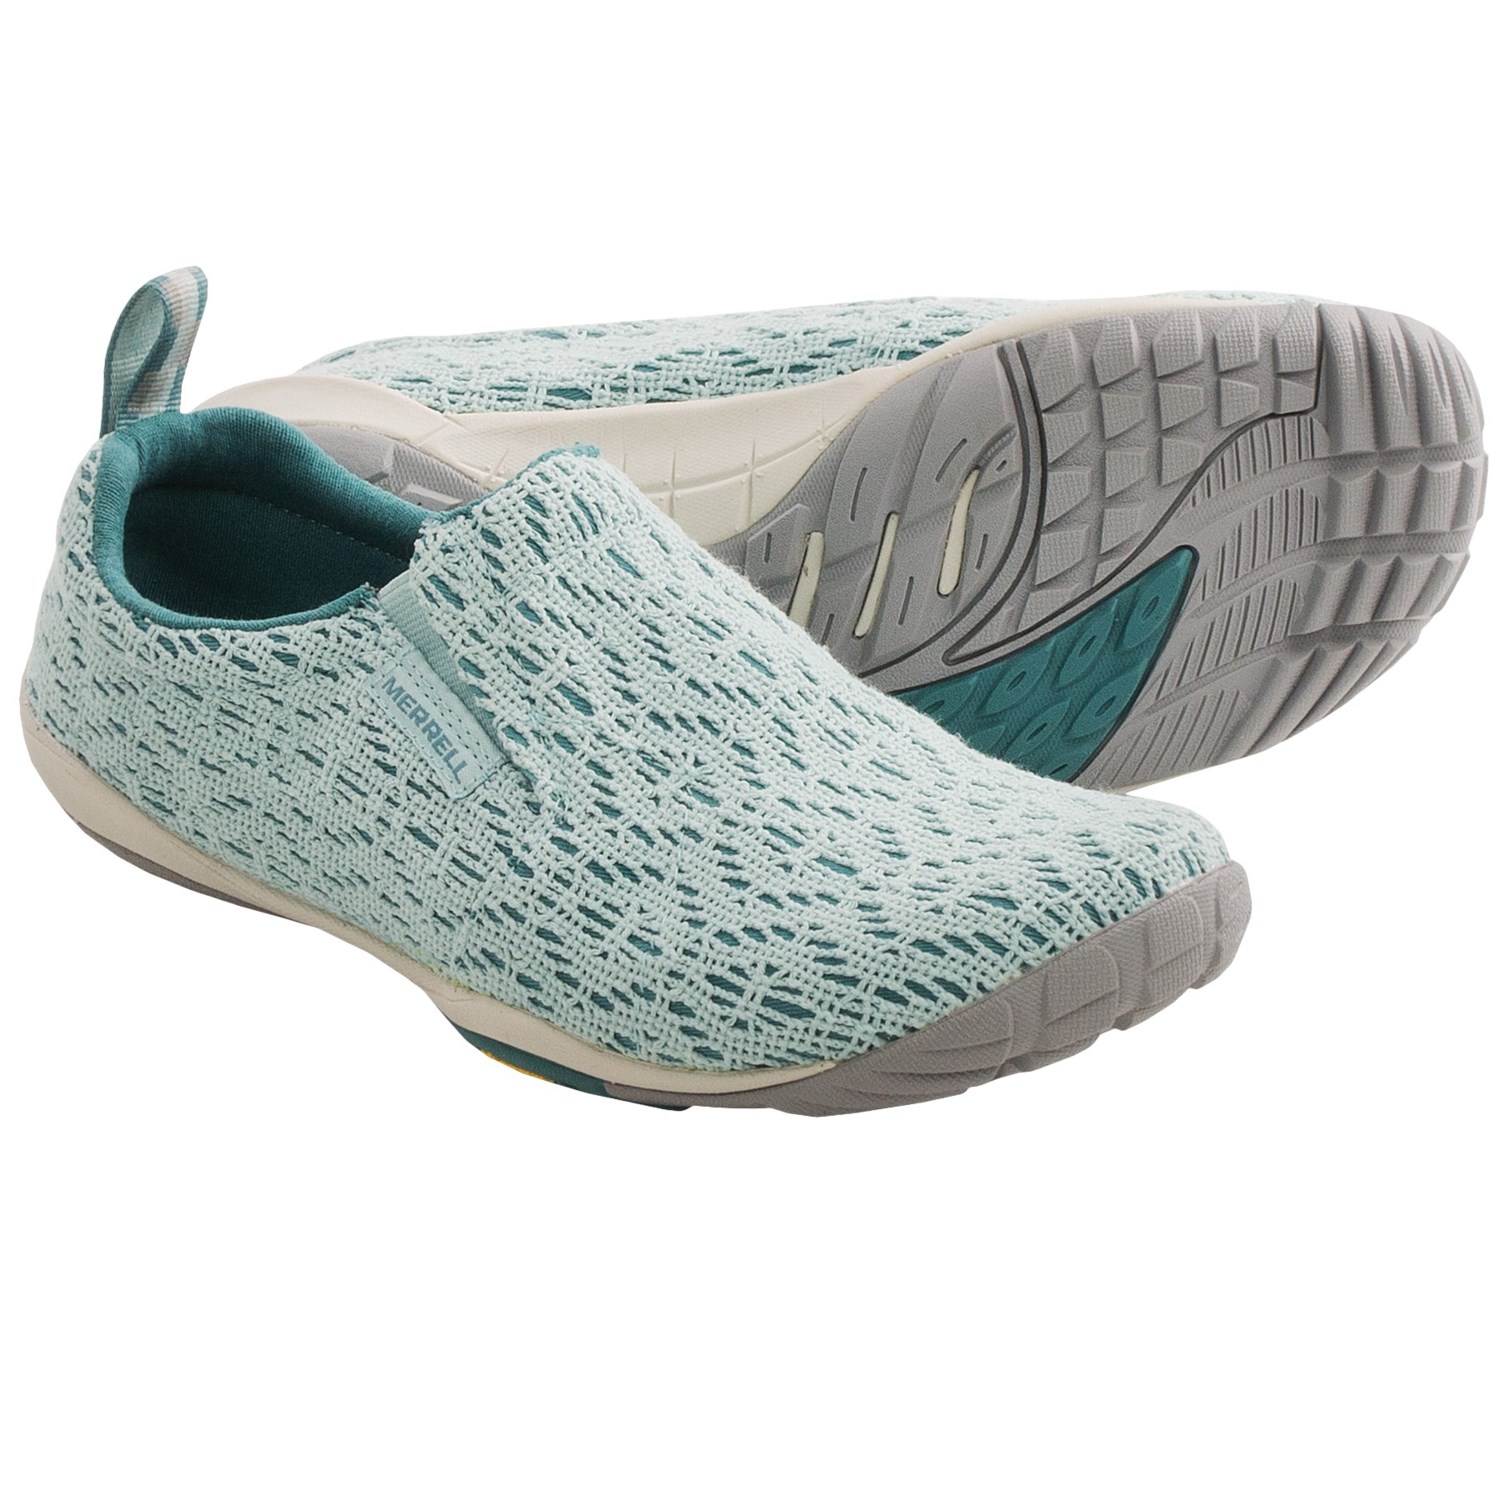 Merrell Barefoot Life Jungle Glove Lace Shoes (For Women)